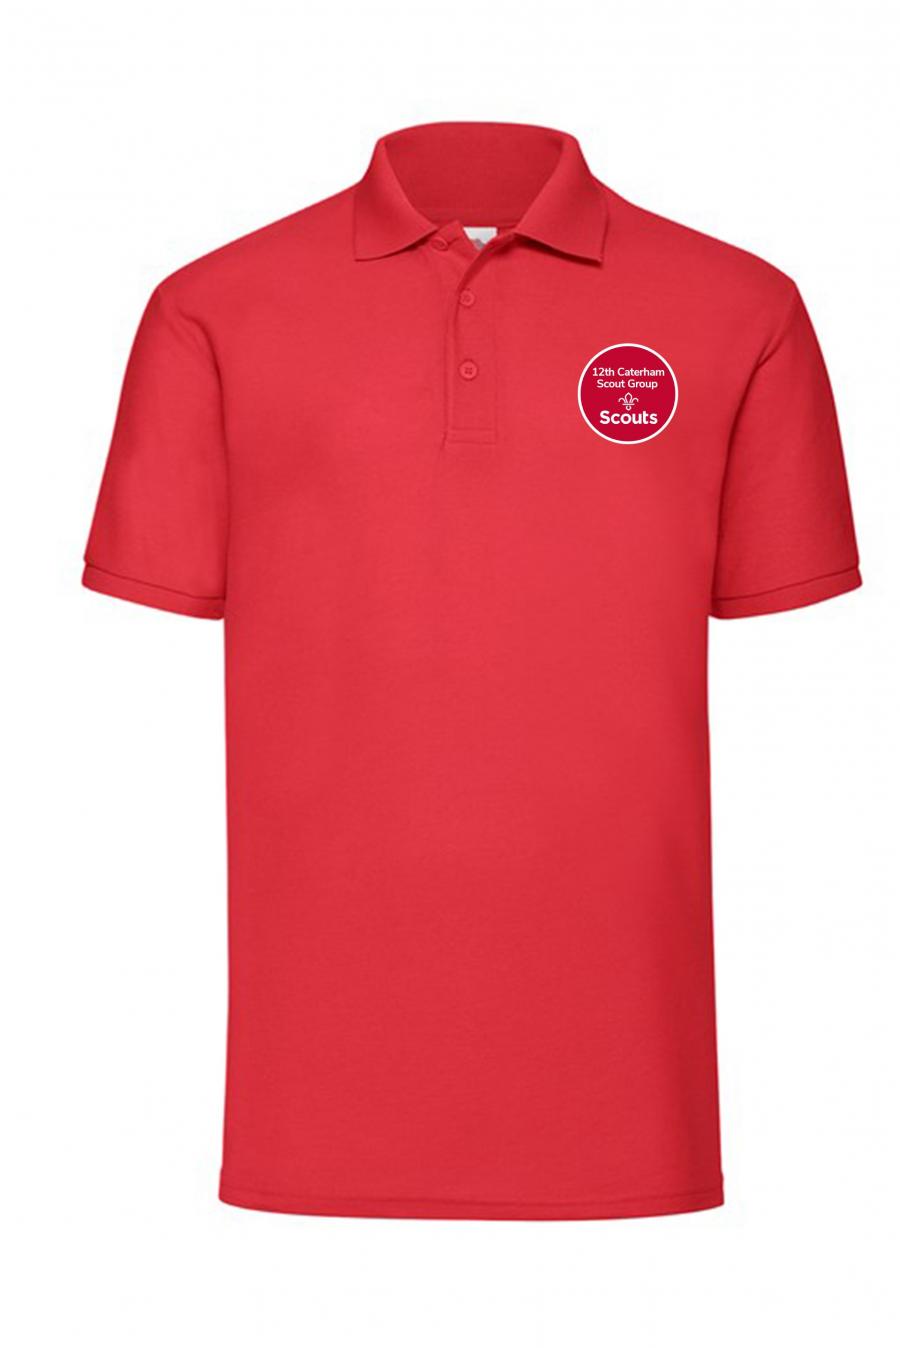 12th Caterham Scouts - Kids Polo Shirt